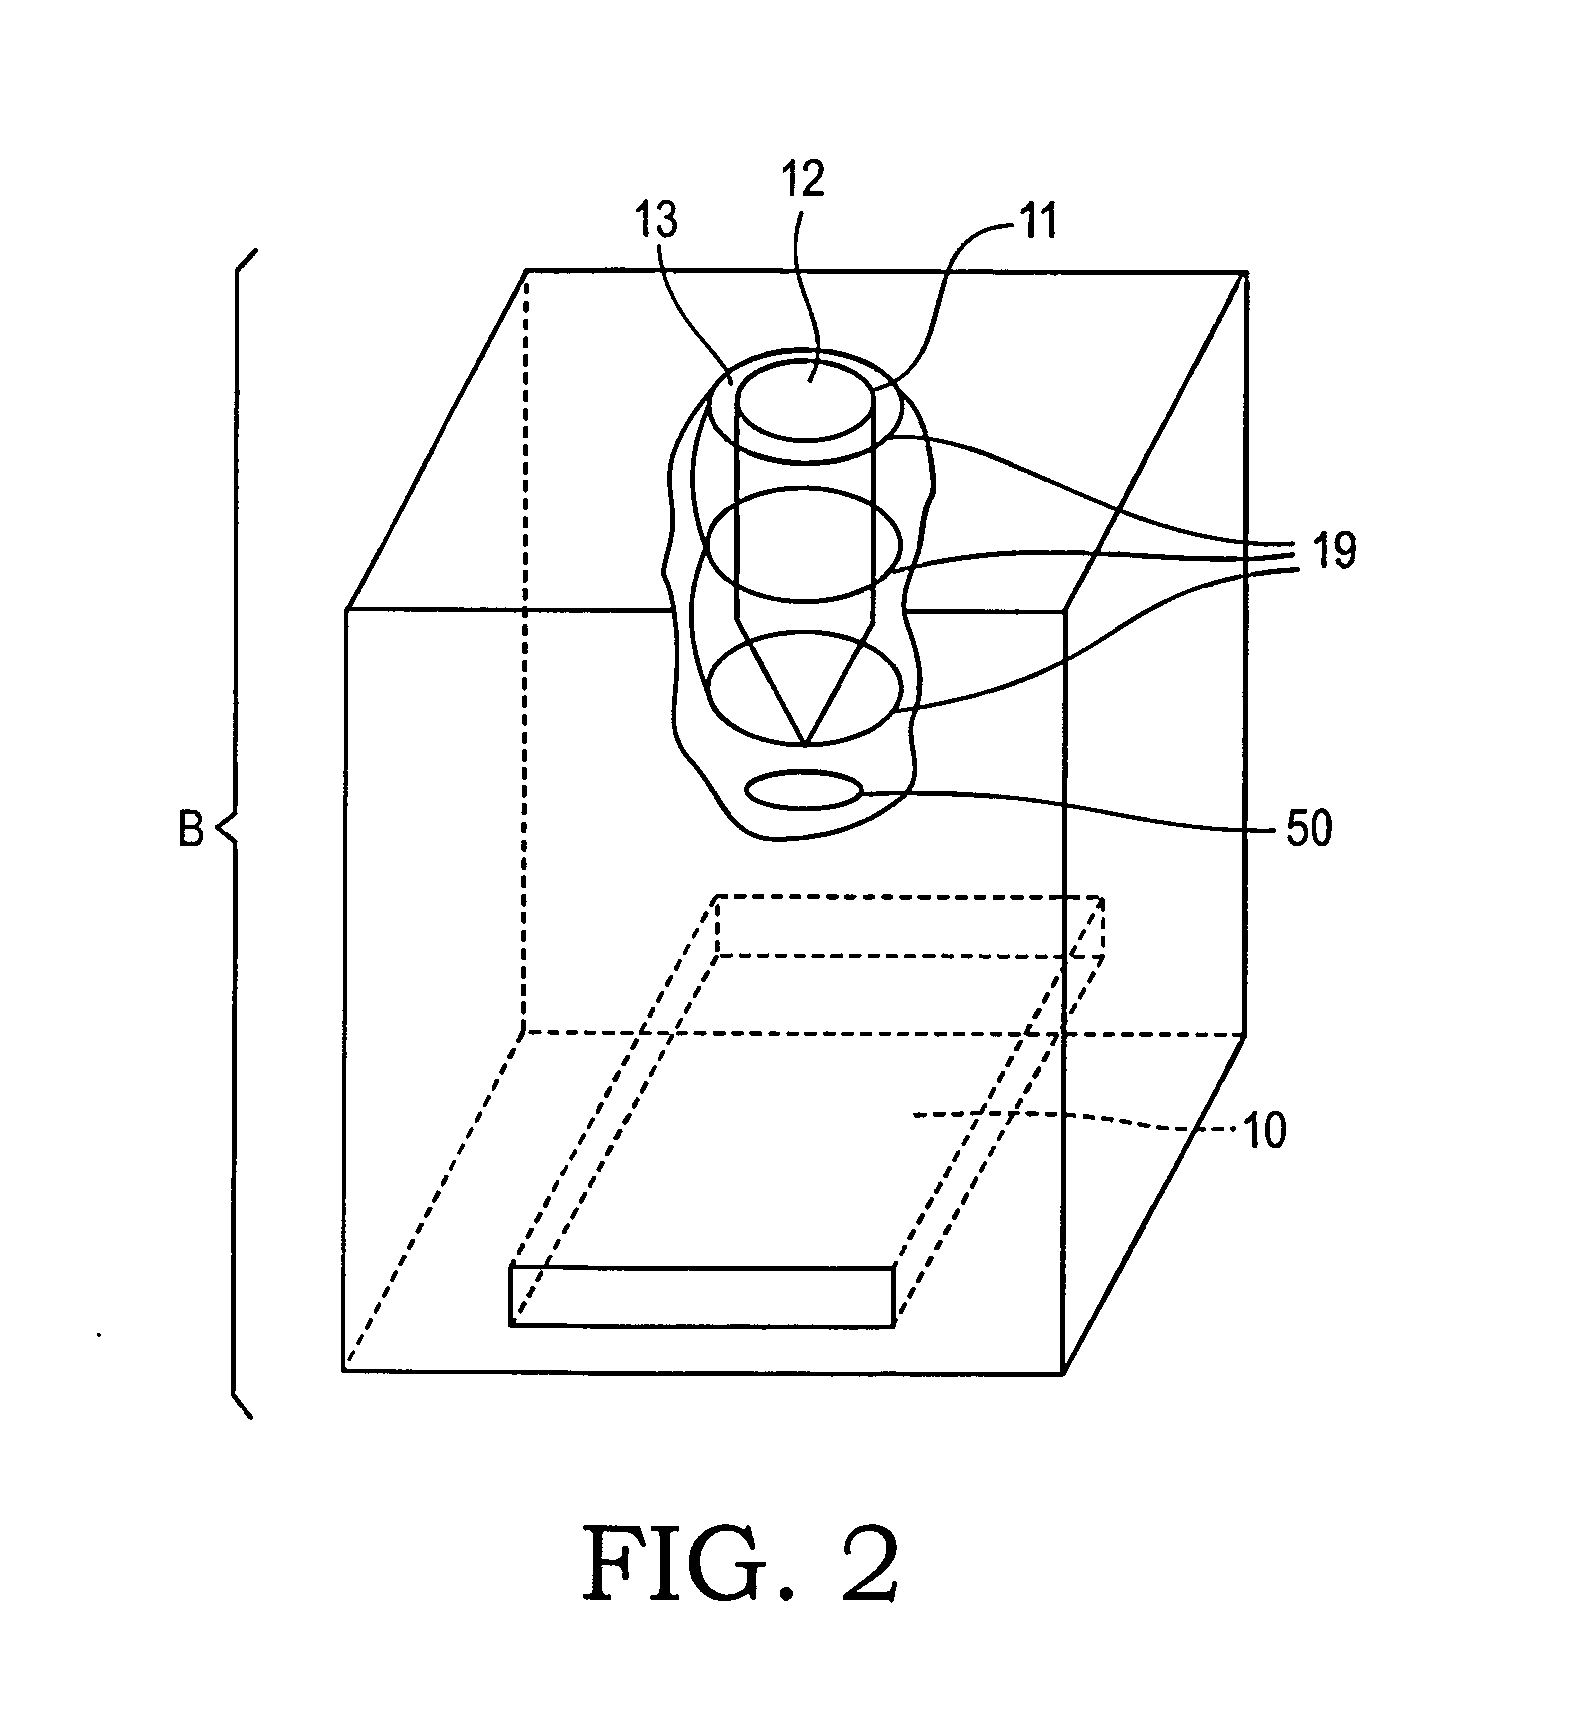 Device and method for inducing brain injury in animal test subjects